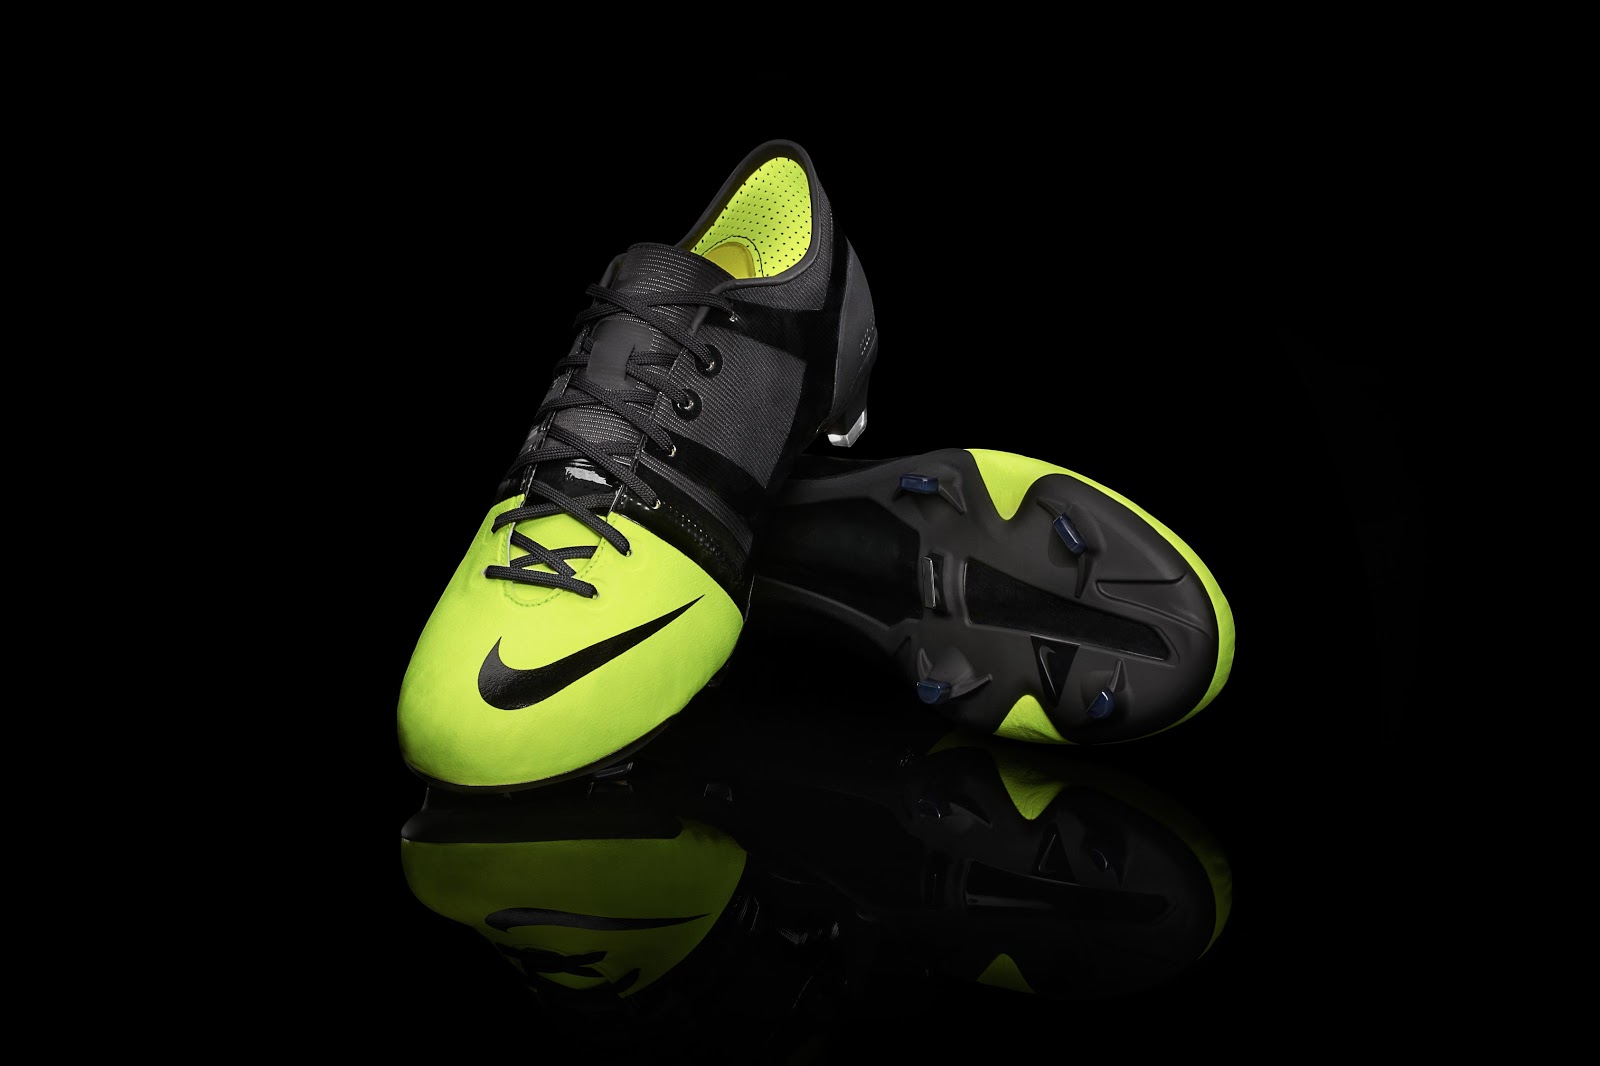 Nike GS 2012 Football Boots In Detail - Footy